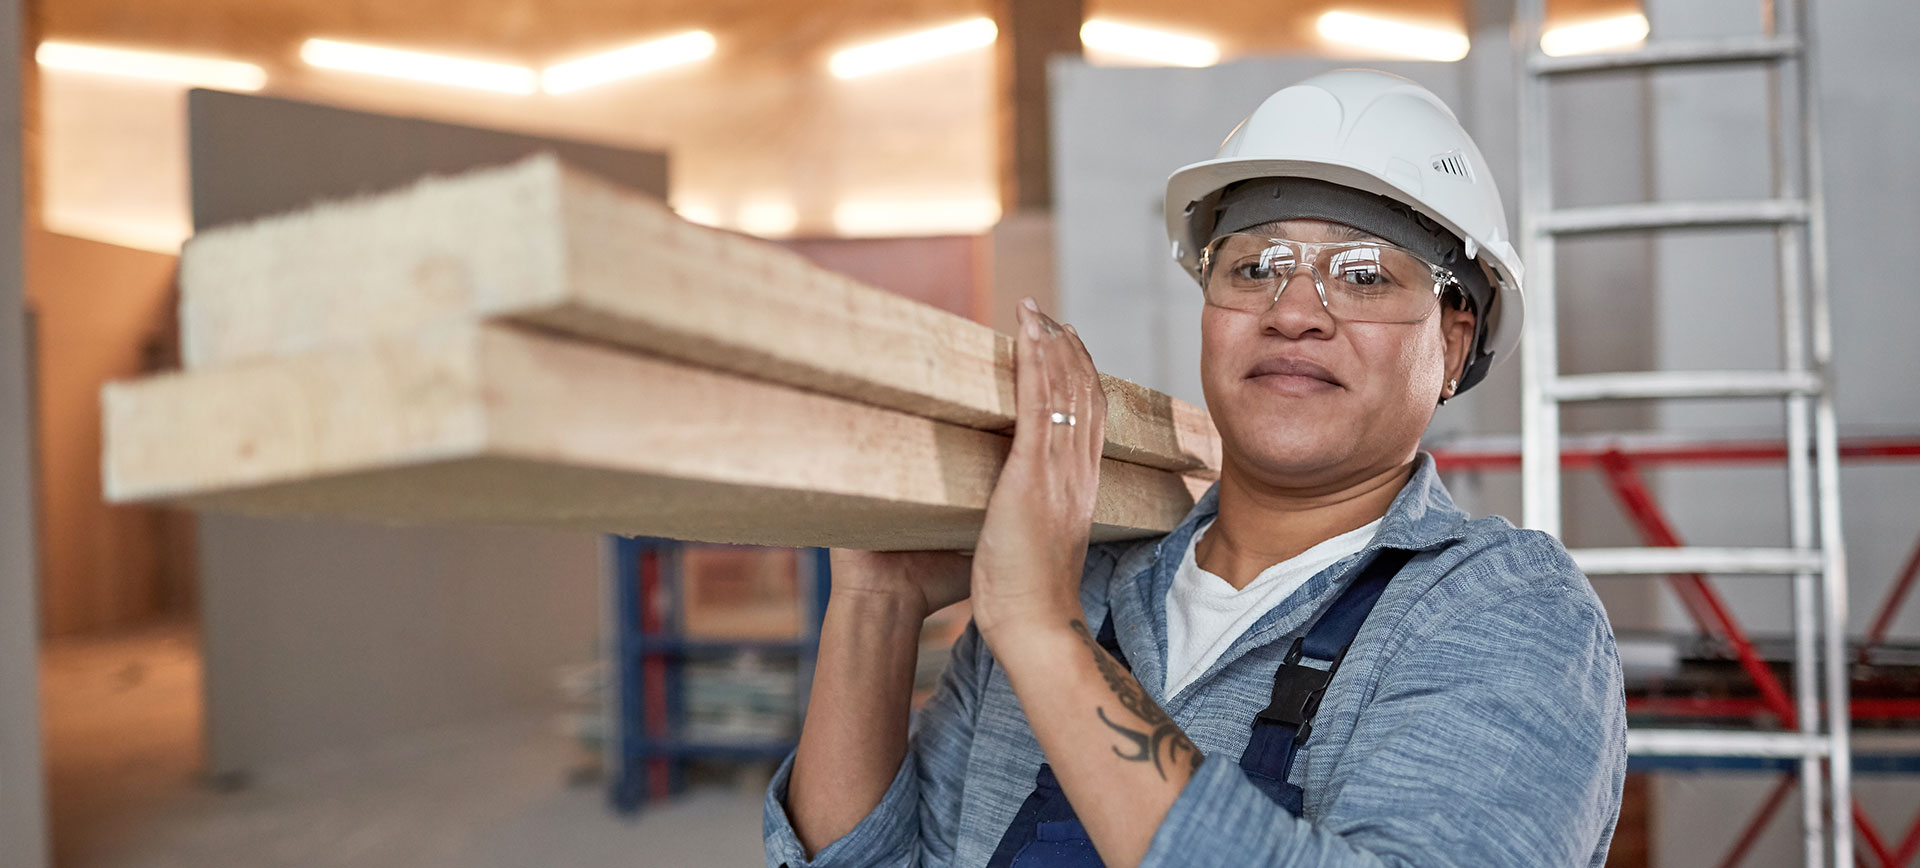 Building a more inclusive construction industry for women